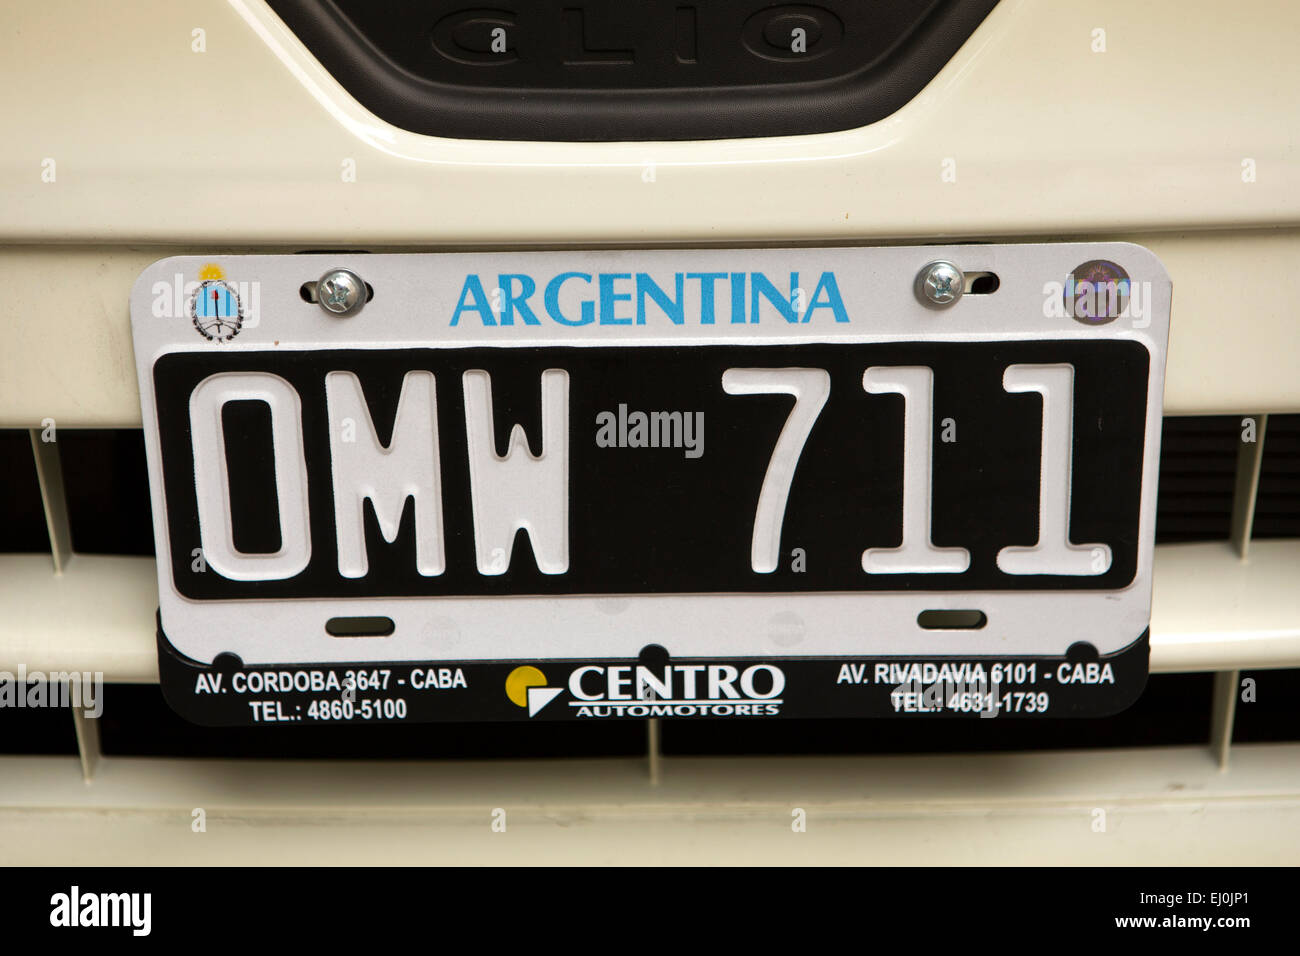 Argentina, Buenos Aires, Retiro, Argentinian vehicle number plate Stock Photo